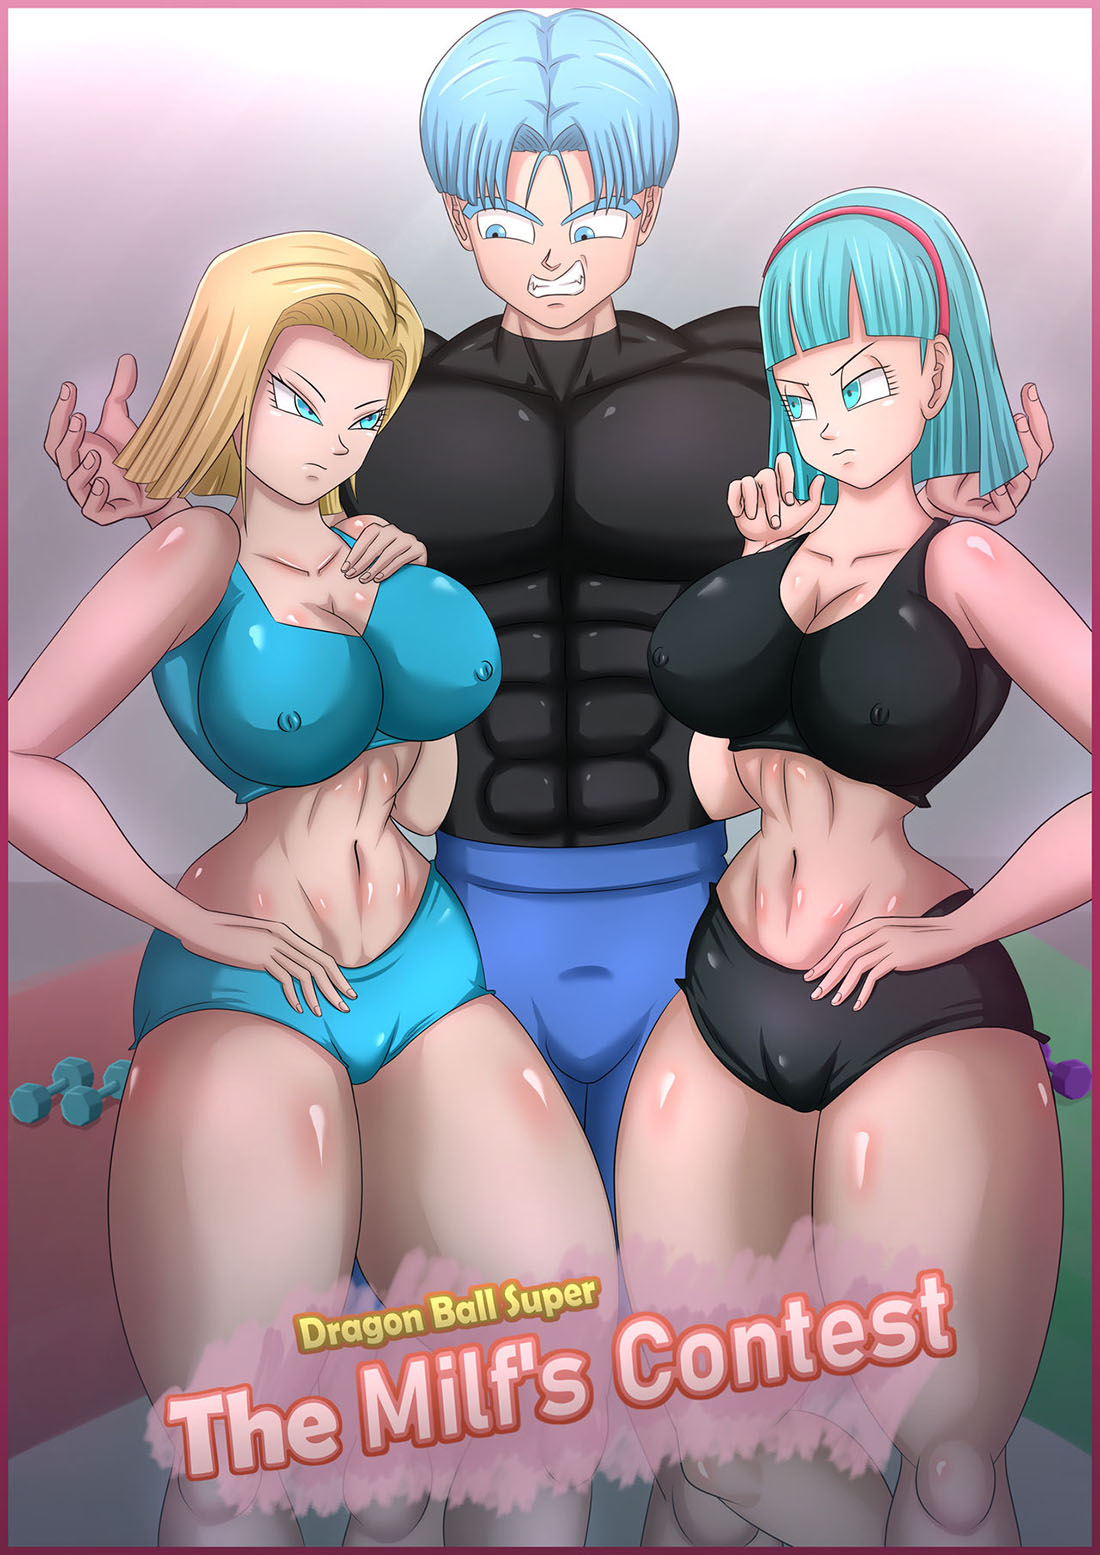 The Milf’s Contest – Magnificent Sexy Gals Bulma y androide 18